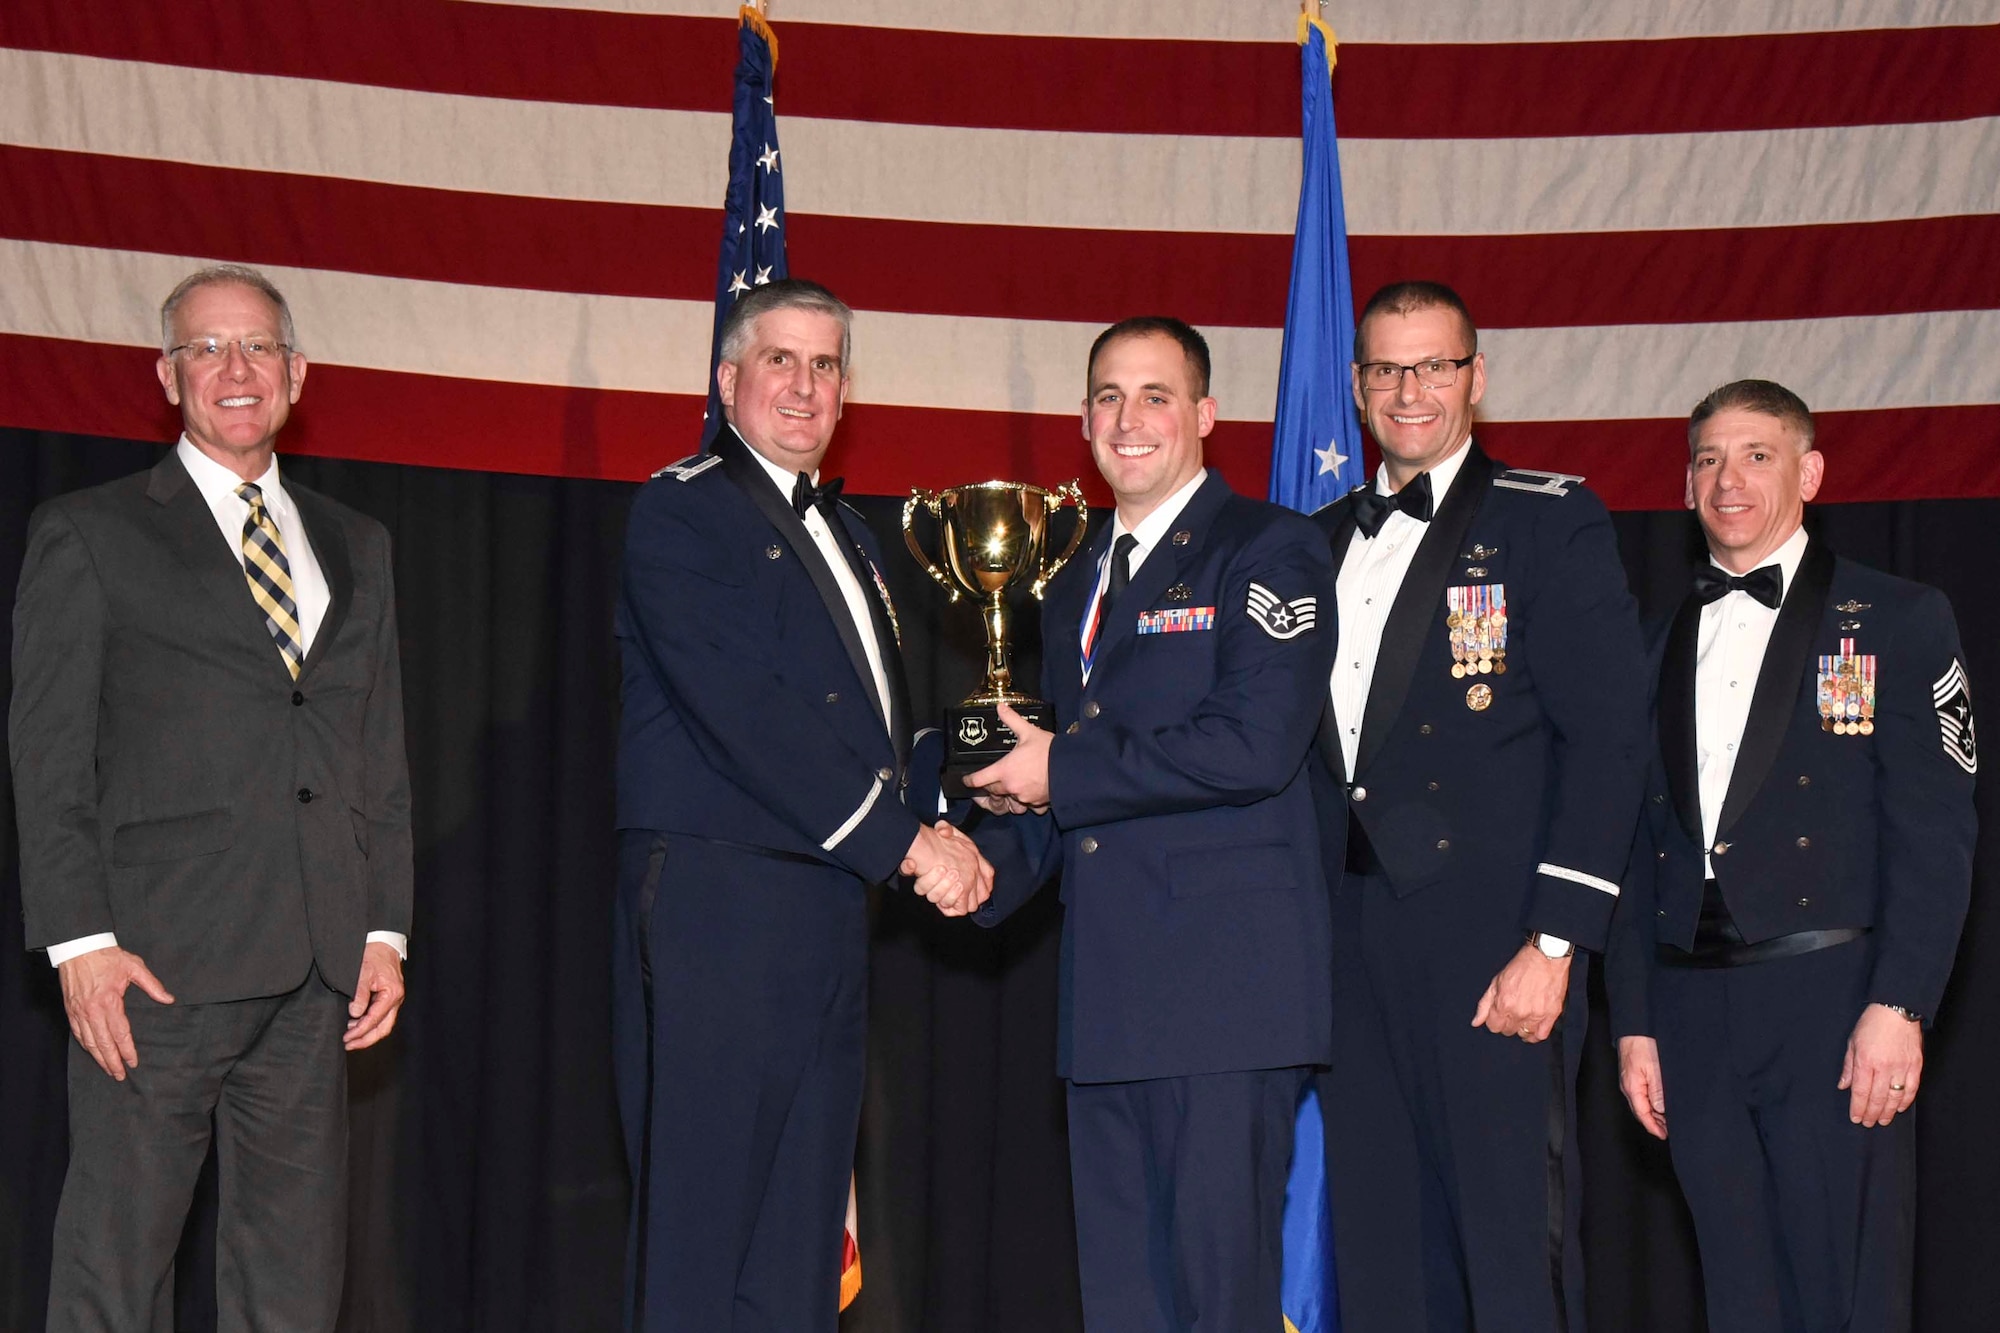 Staff Sgt. Eric Keen, 22nd Aircraft Maintenance Squadron, center, accepts the 2016 Honor Guardsman of the Year, NCO award, Feb. 3, 2017, at McConnell Air Force Base, Kan. The annual awards ceremony recognized military and civilian members who excel in their areas of responsibilities, leadership qualities, community involvement, self-improvement and innovation during the period of January to December 2016. (U.S. Air Force photo/Senior Airman Christopher Thornbury)